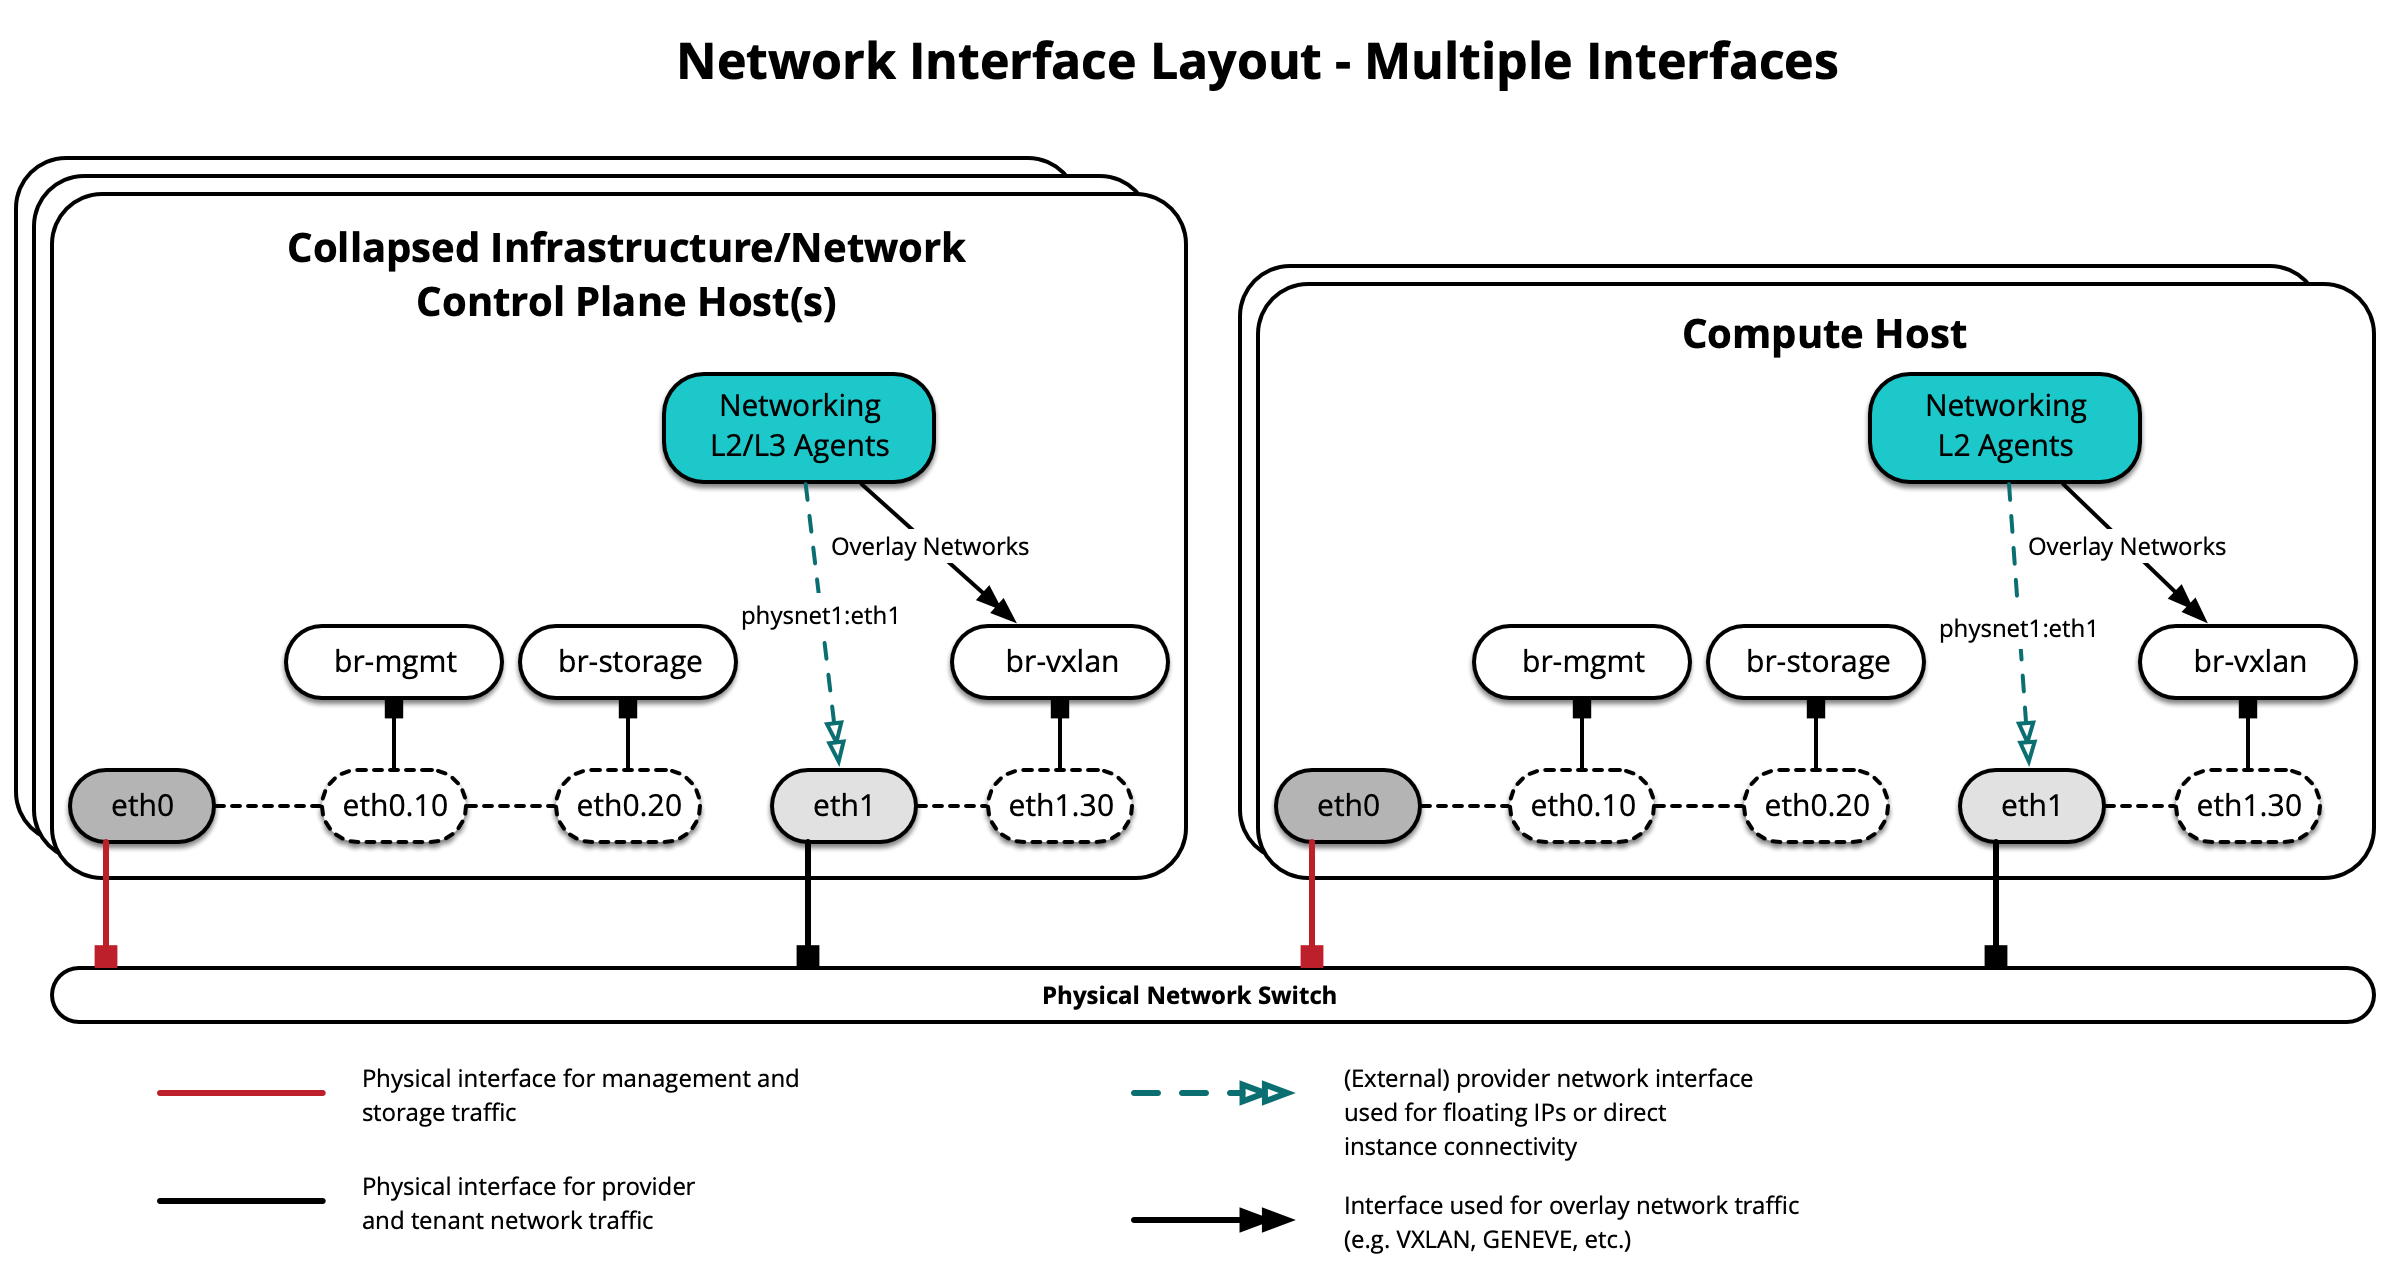 Network Interface Layout - Multiple Interfaces